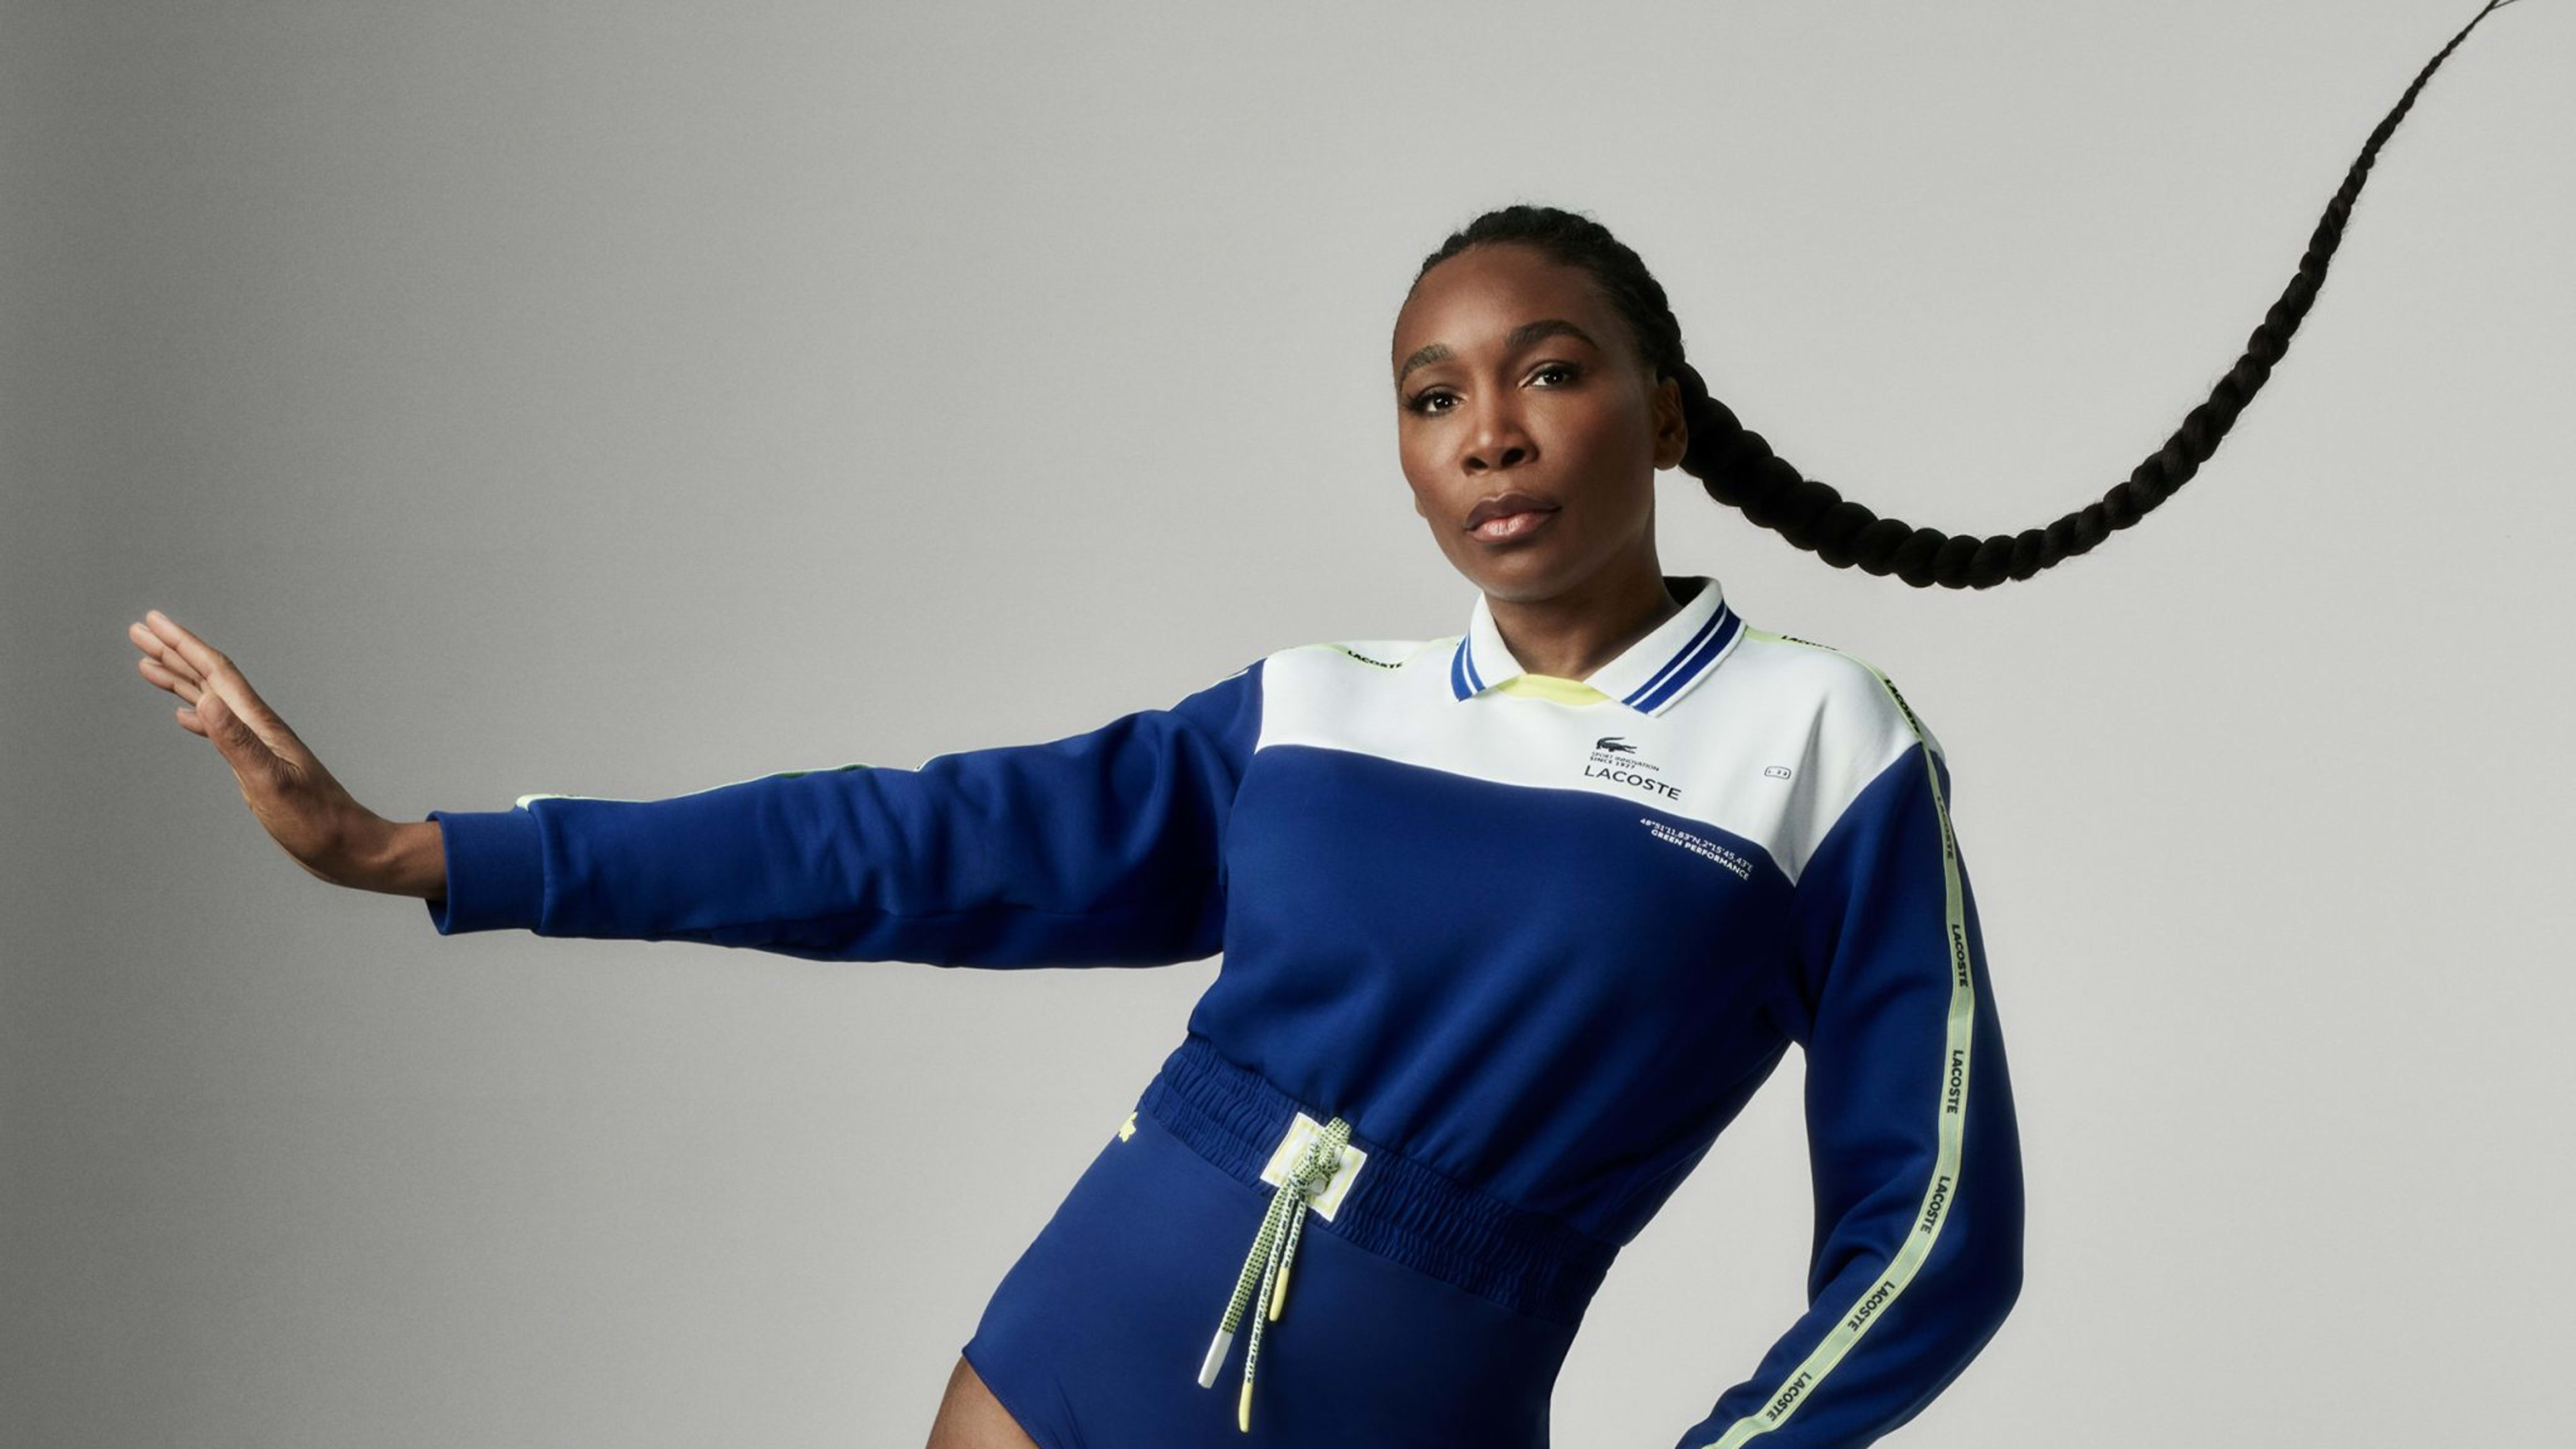 Kritisk Kirkegård uddøde Style Points: Lacoste taps into its tennis roots with Venus Williams as  global ambassador